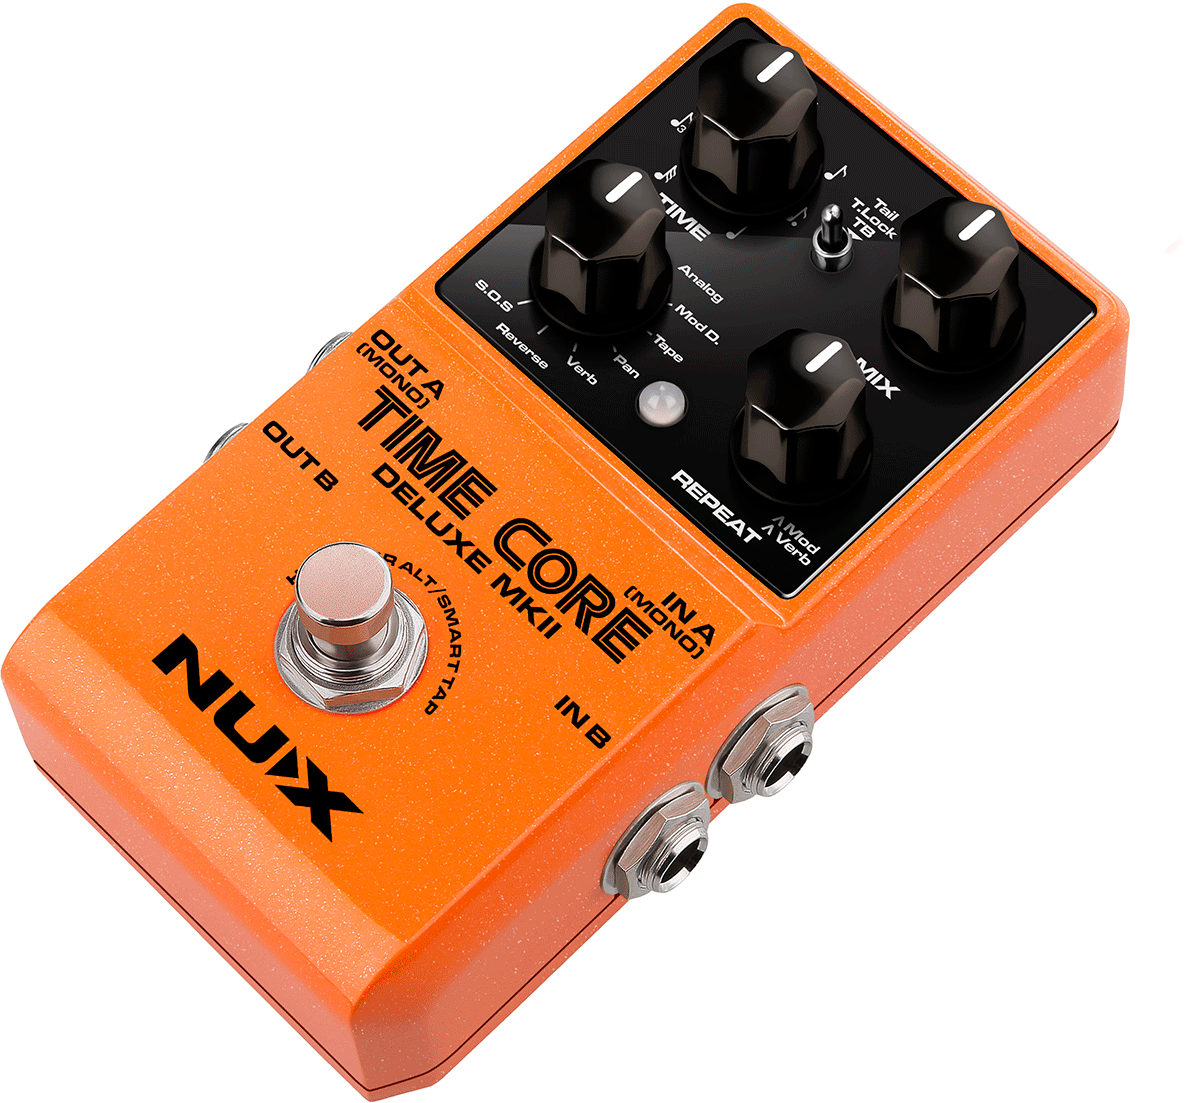 Nux Time Core Deluxe Mk2 - Reverb/delay/echo effect pedaal - Variation 1